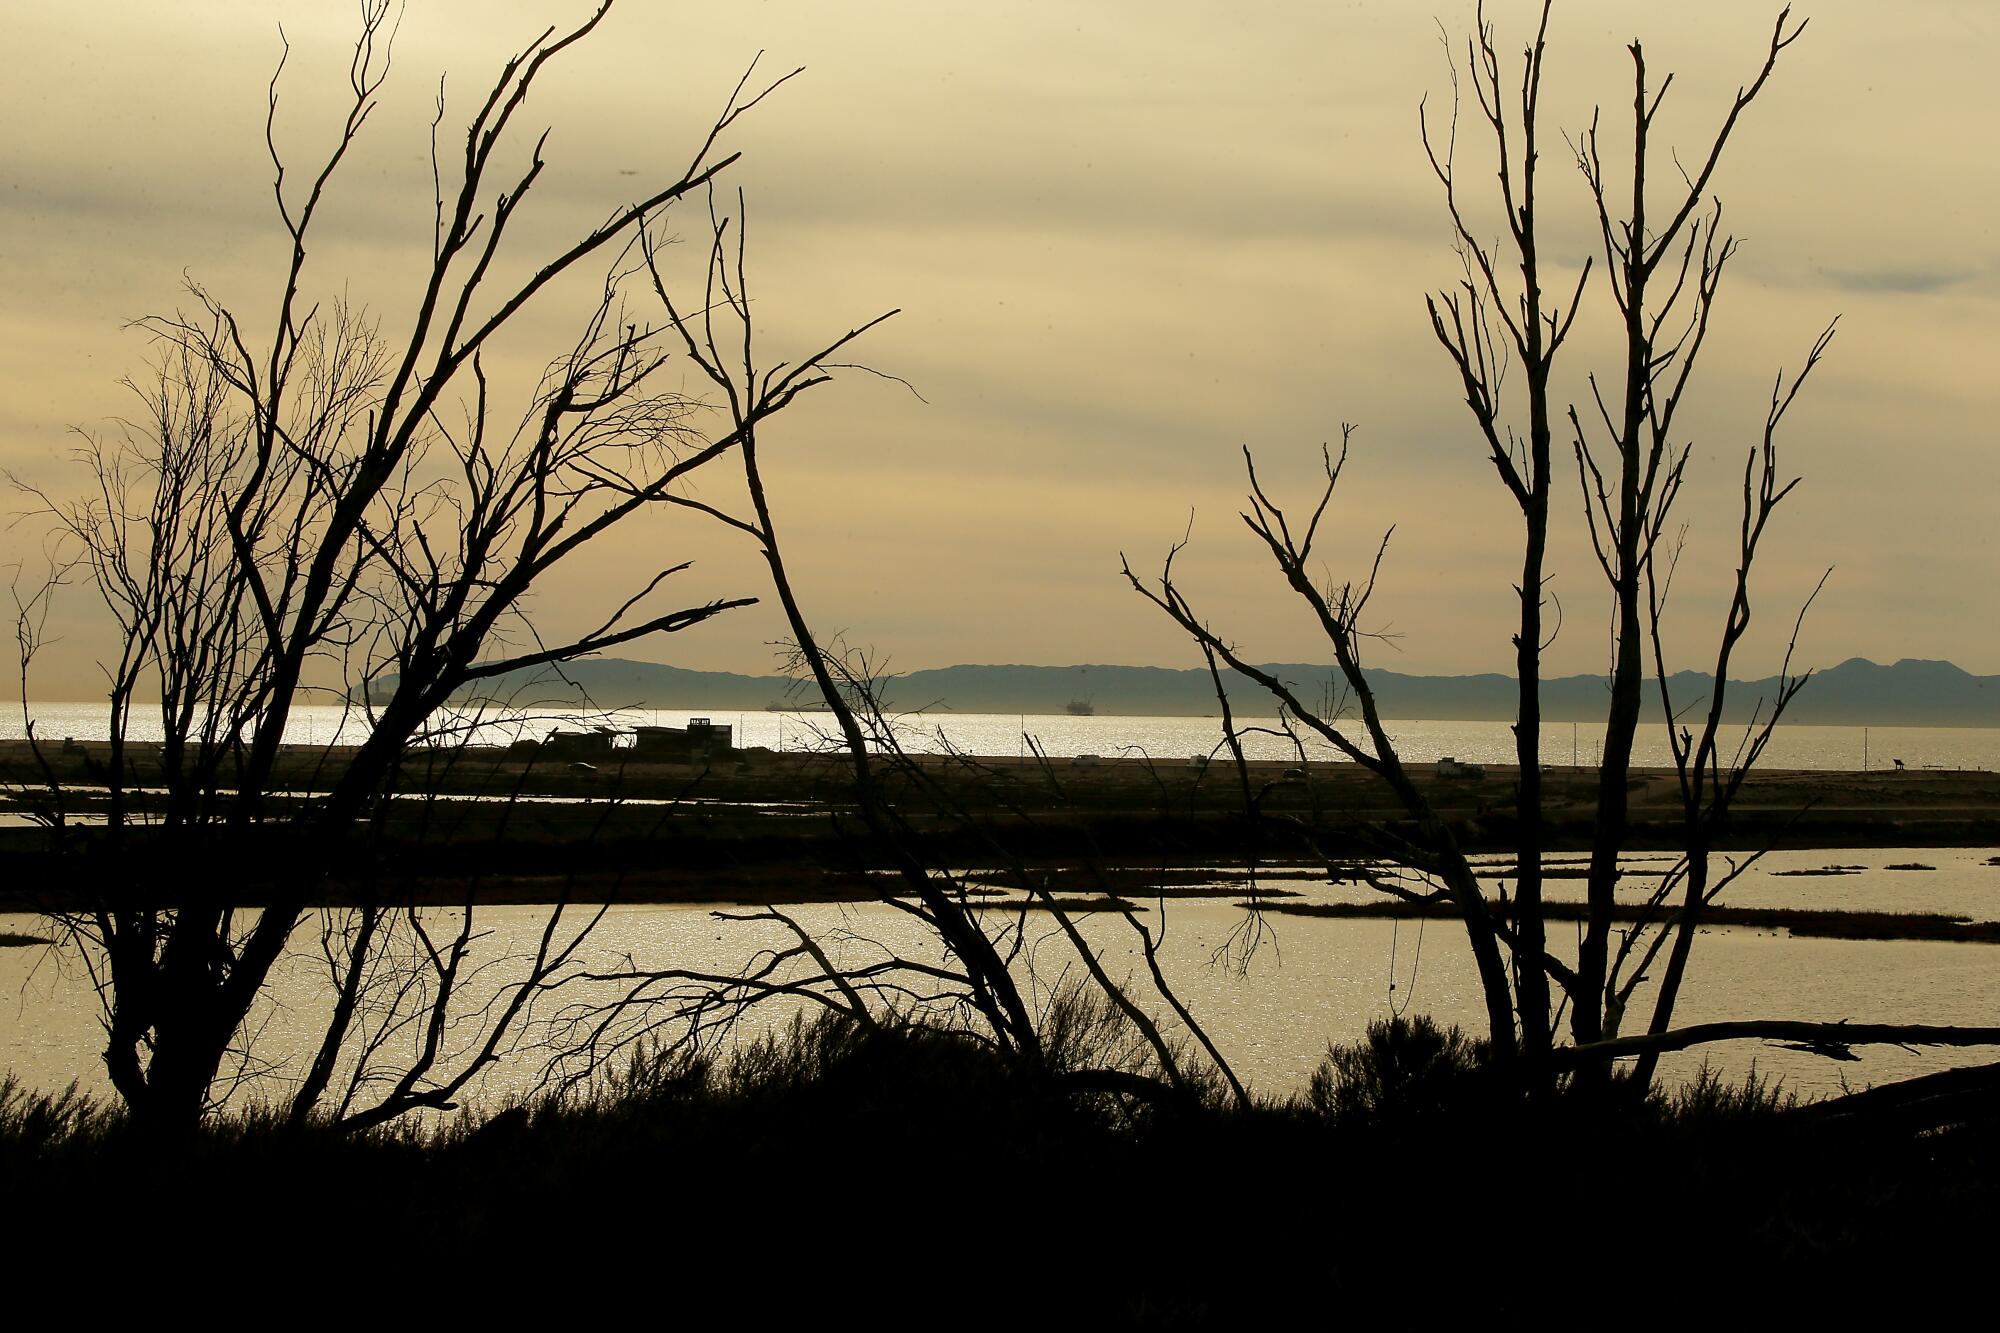 The Bolsa Chica wetlands serve as a backdrop to coastal land that the Acjachemen and Tongva people have reclaimed.